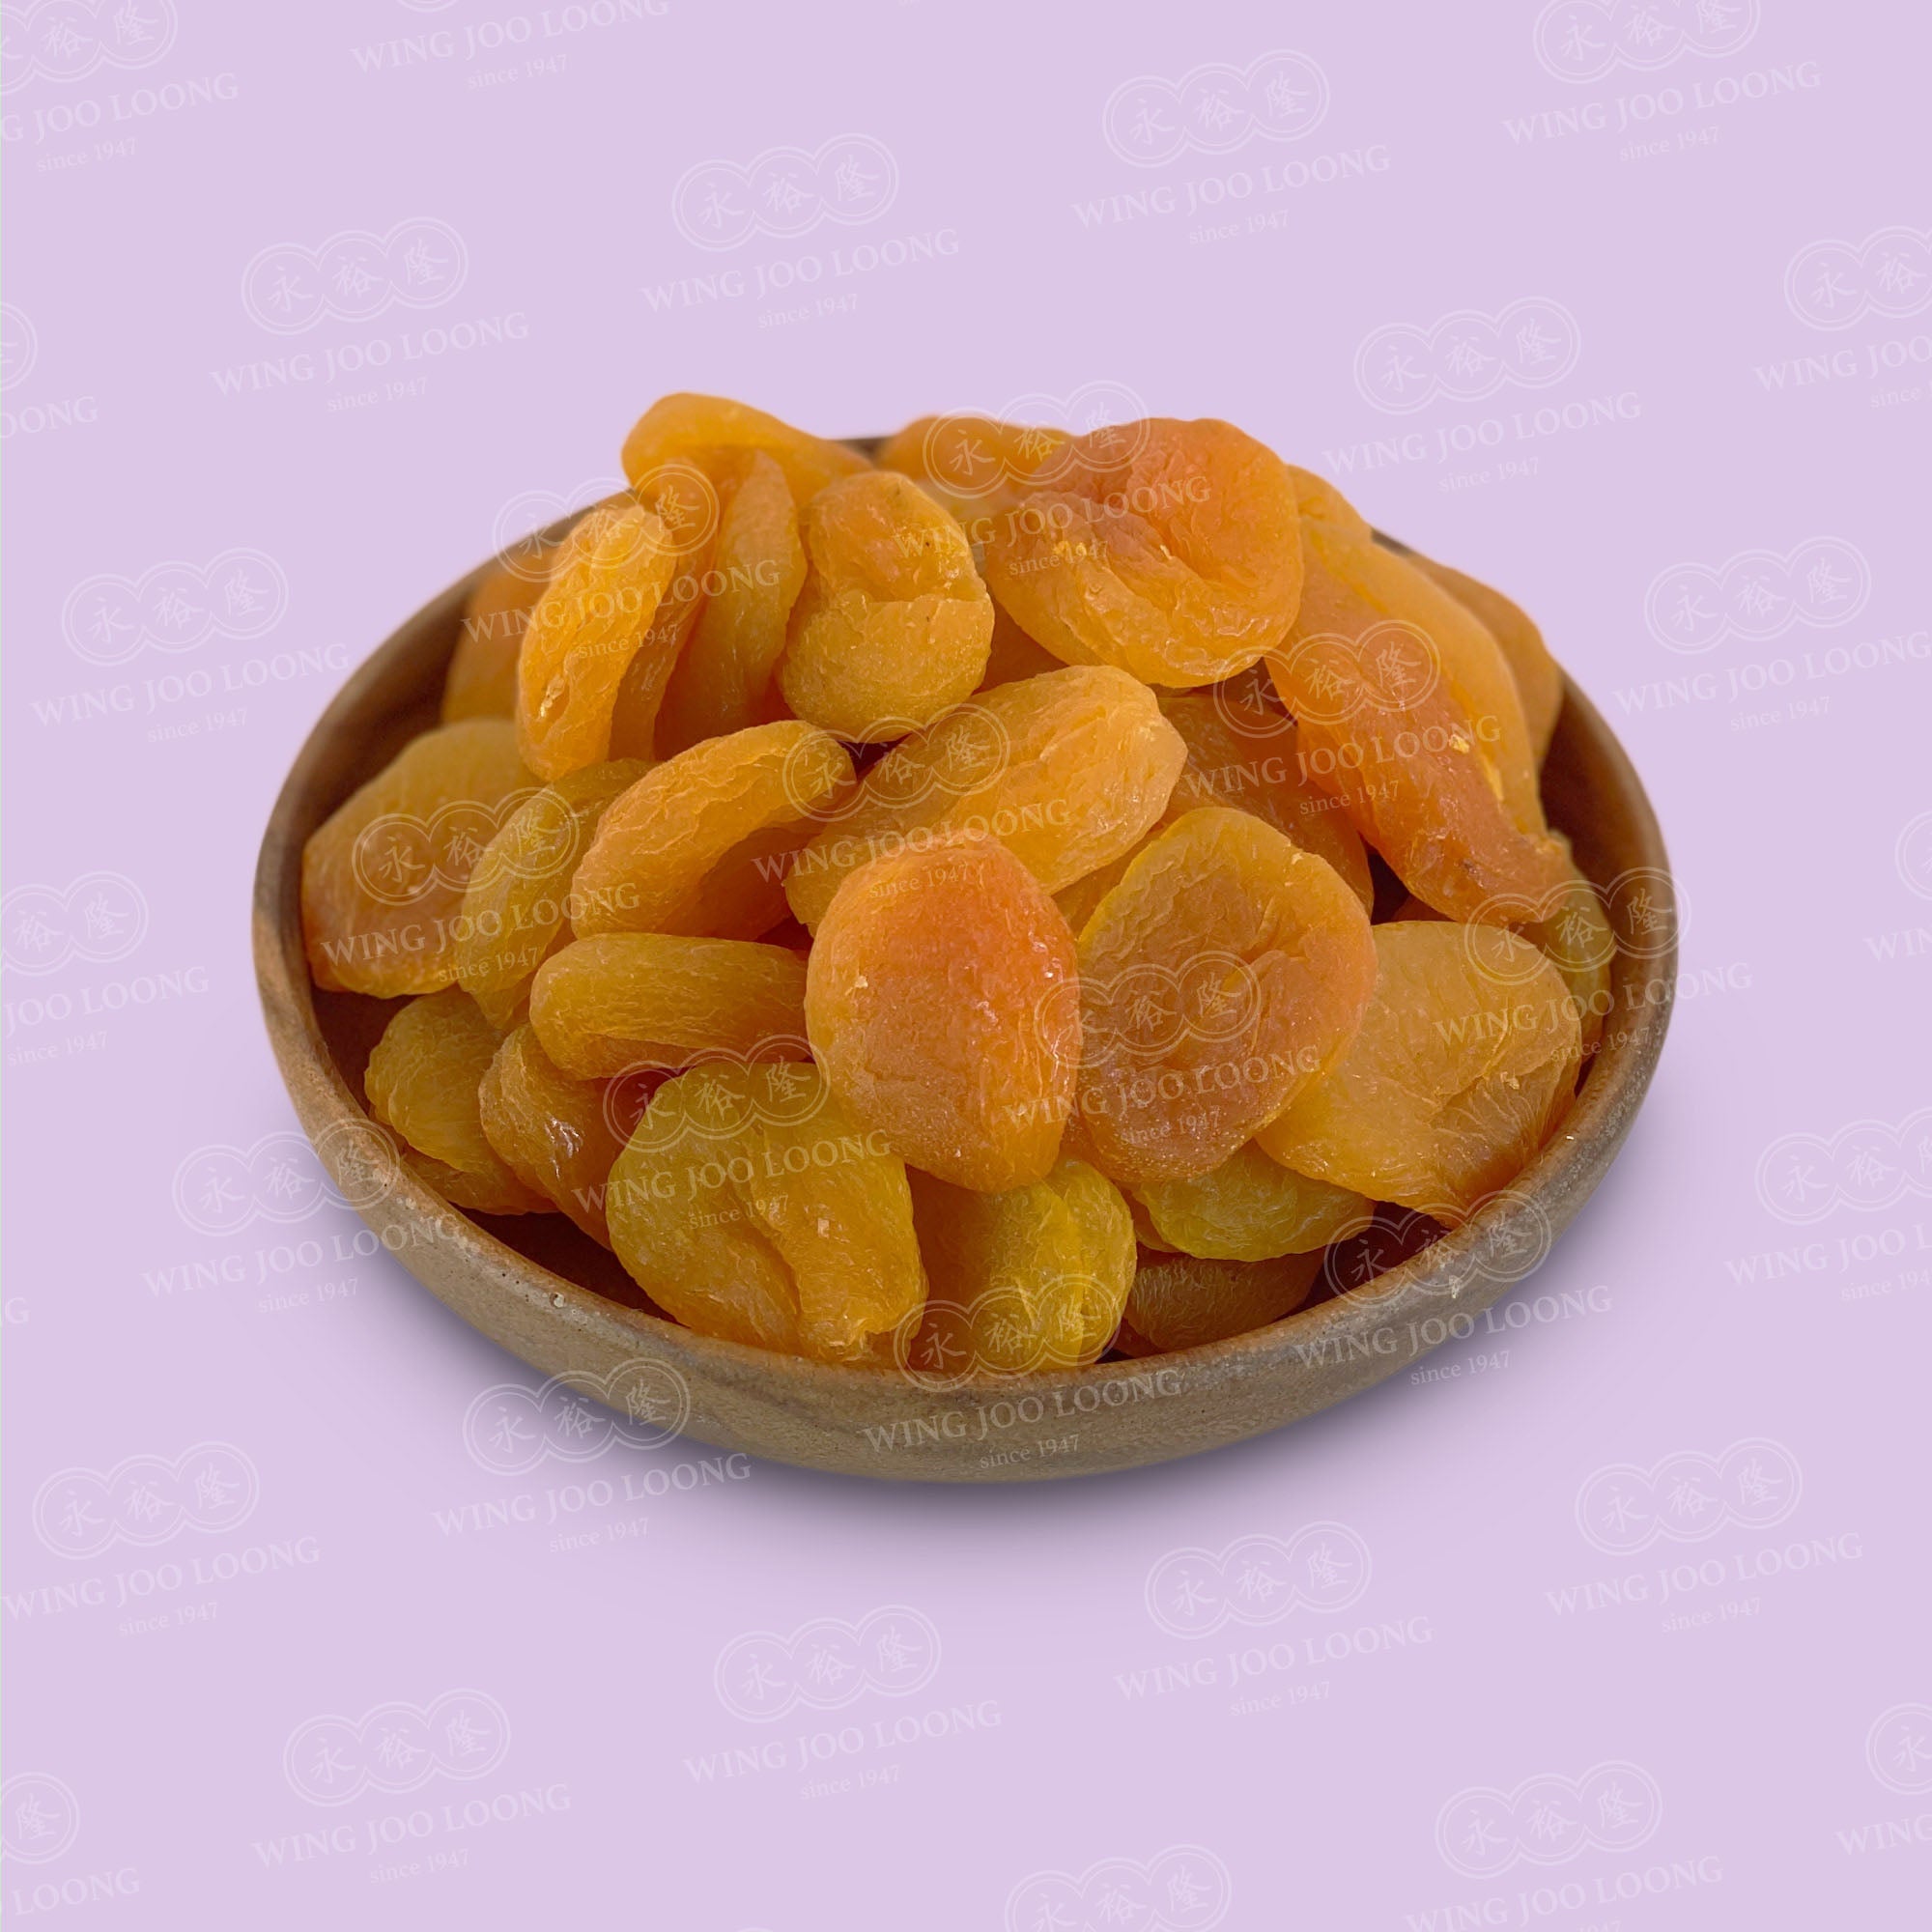 Wing Joo Loong Dried Apricots 杏脯肉